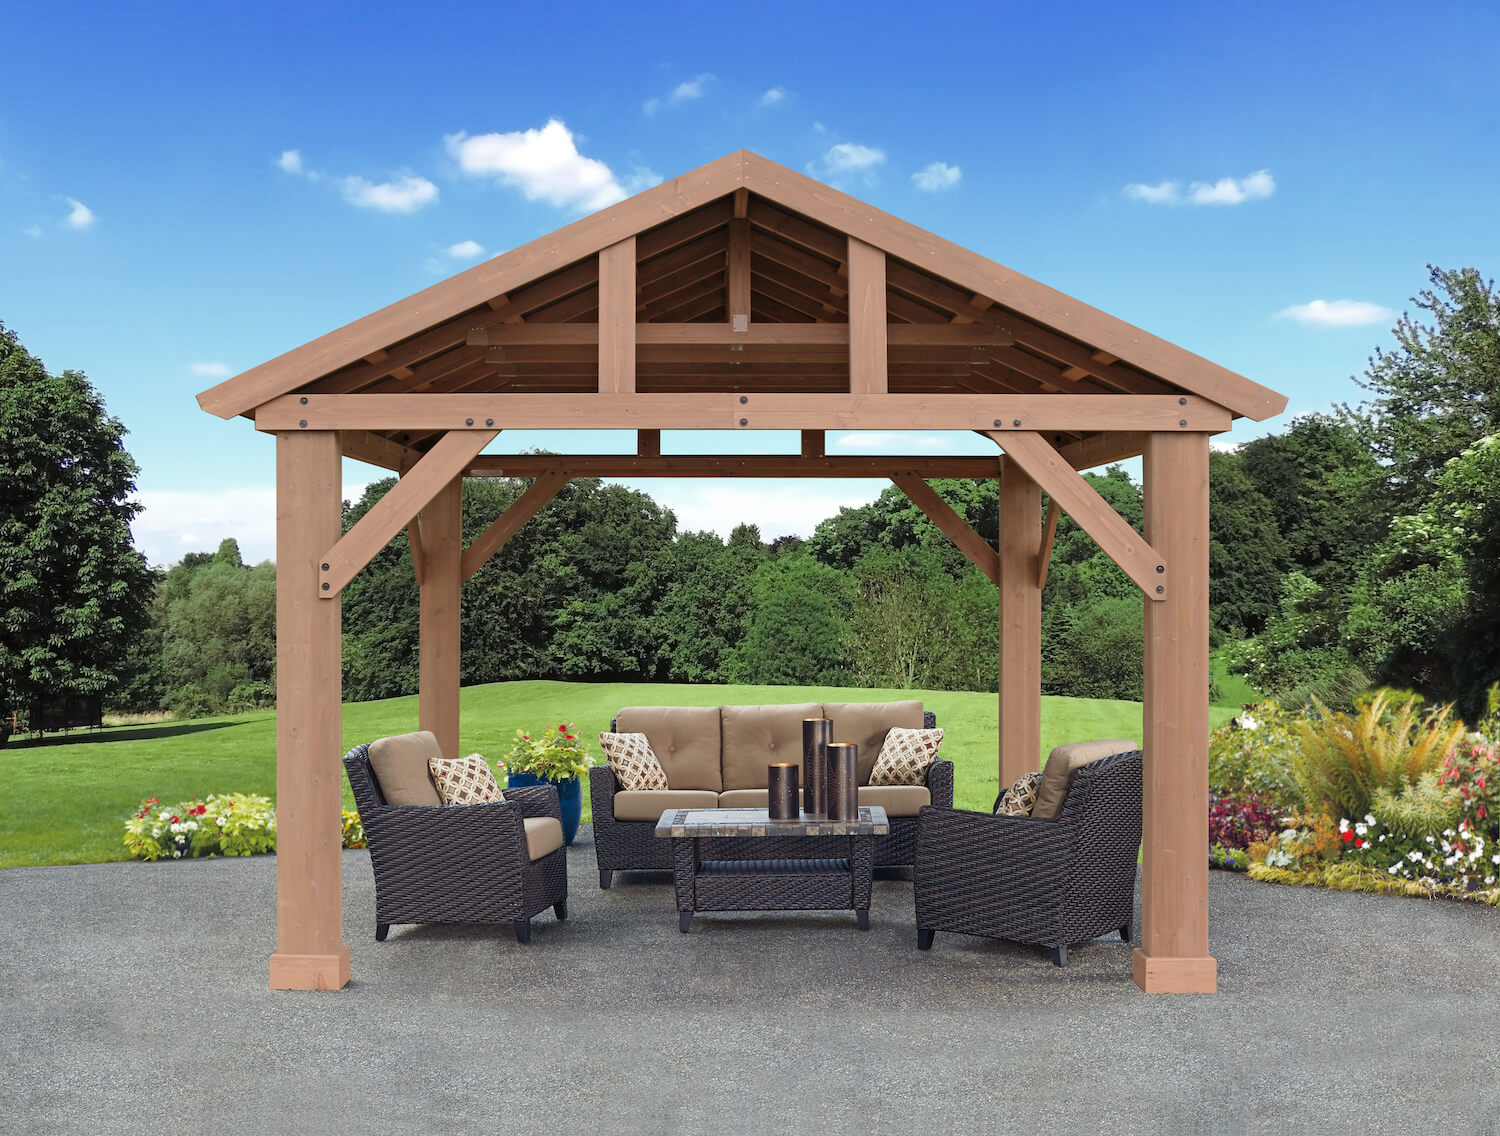 The Meridian Cedar 14 x 12 Pavilion by Yardistry in a garden setting with furniture under.